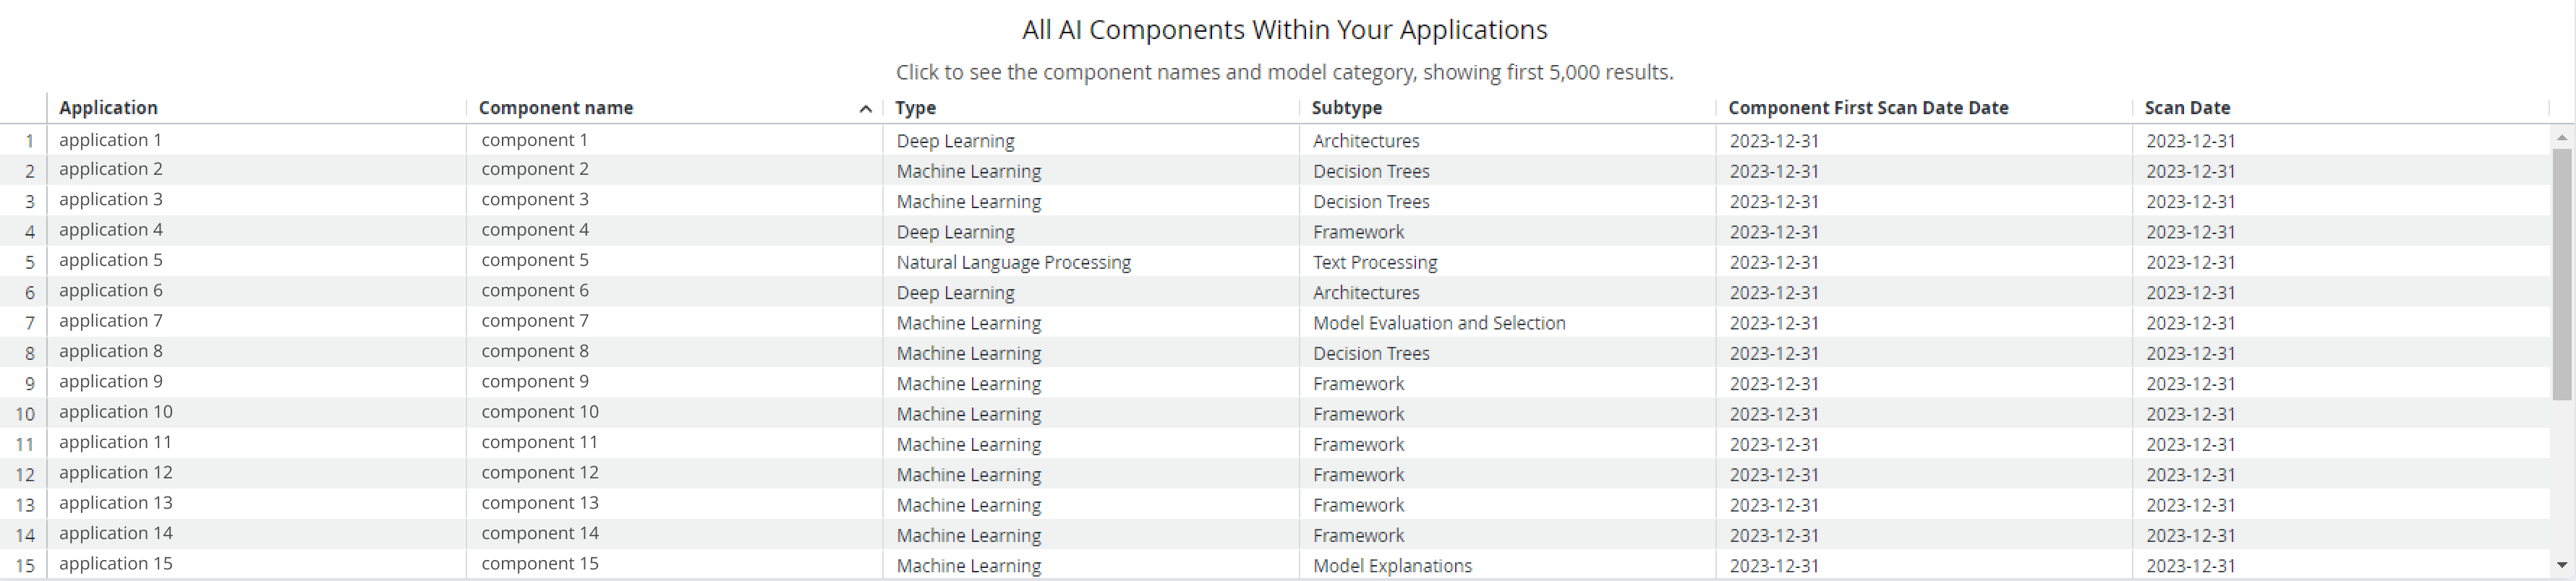 NEW_All_AI_components.png